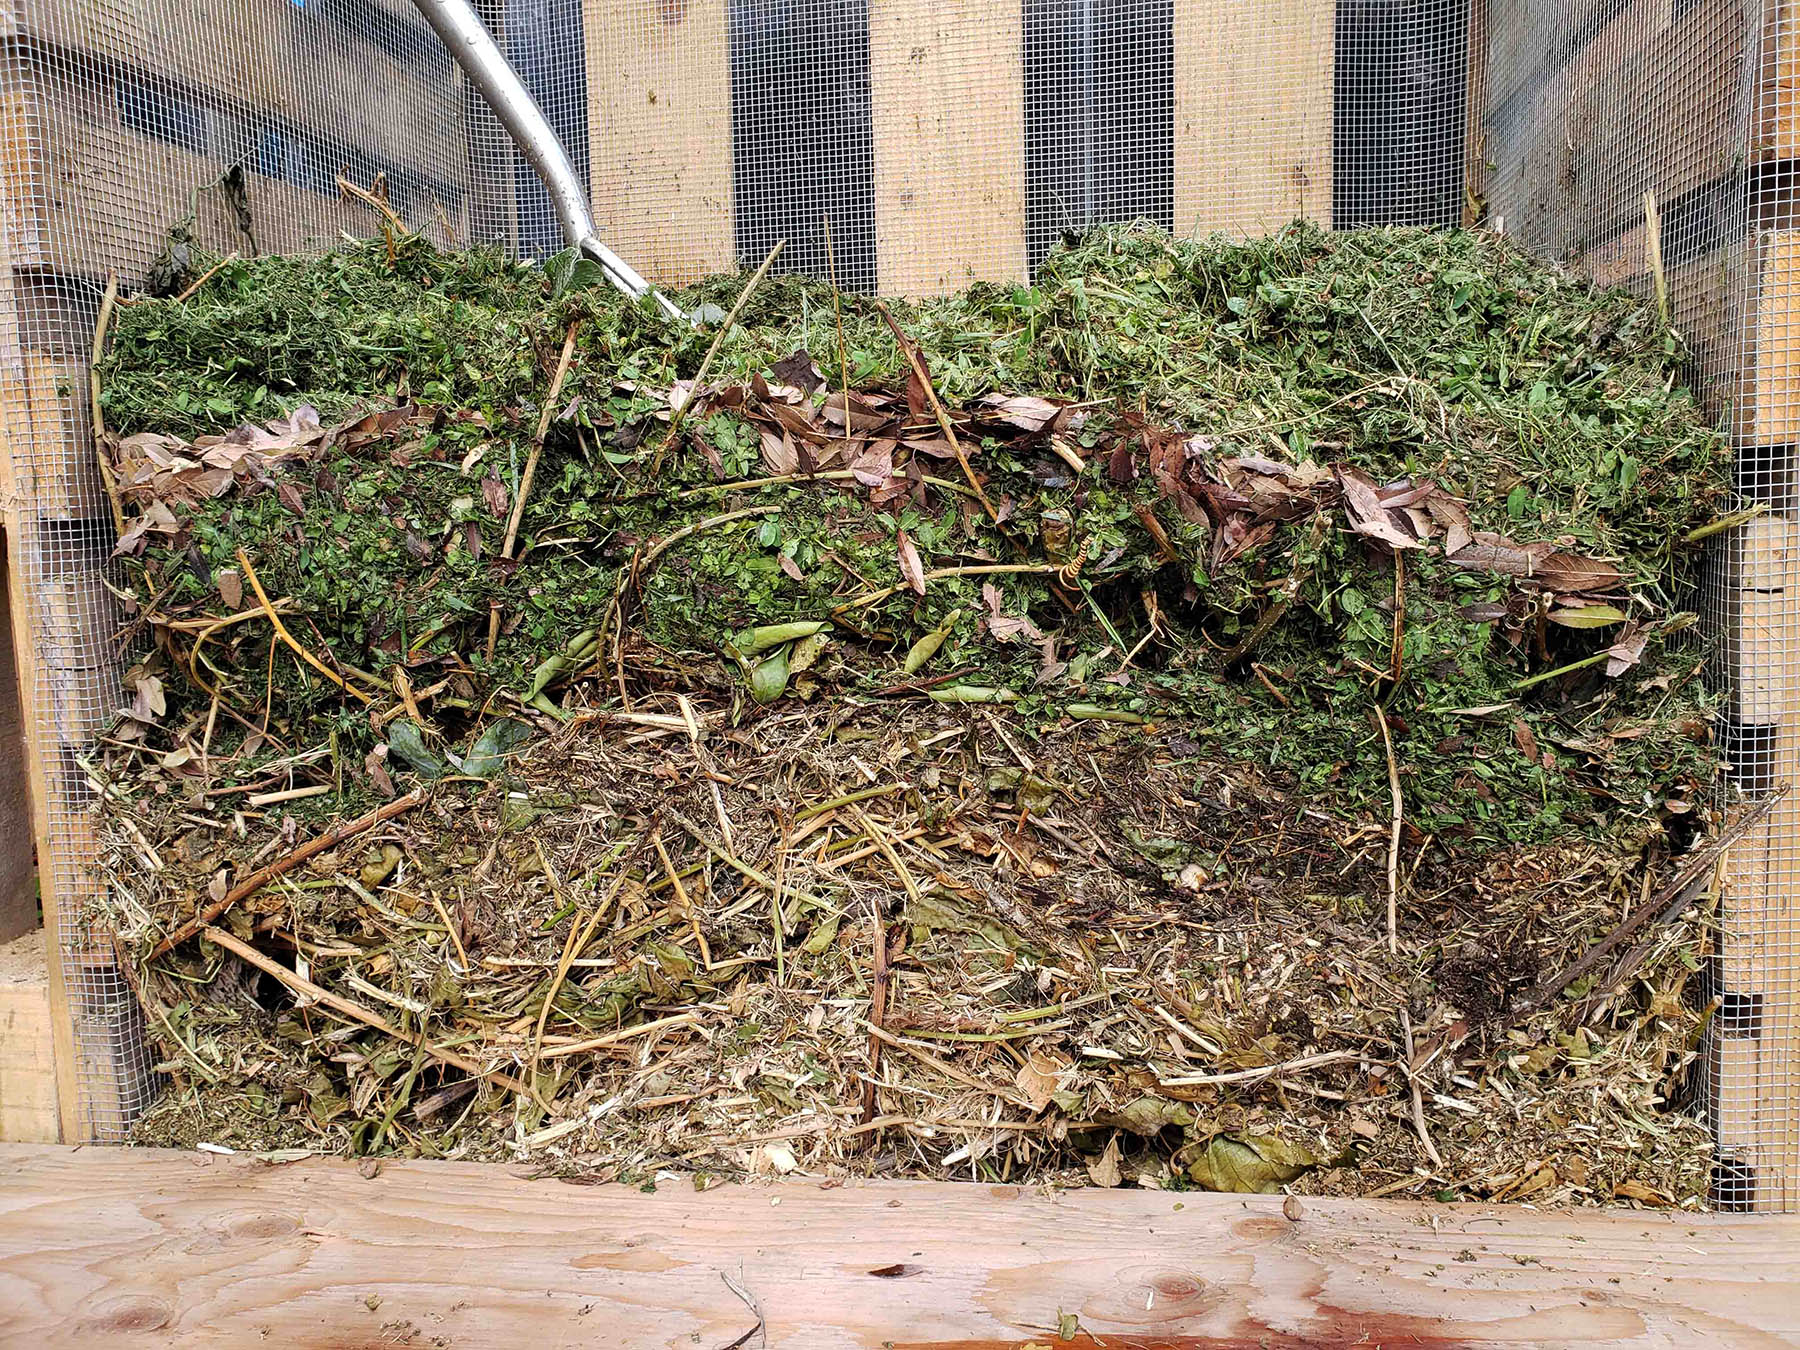 Maintaining a Compost Pile